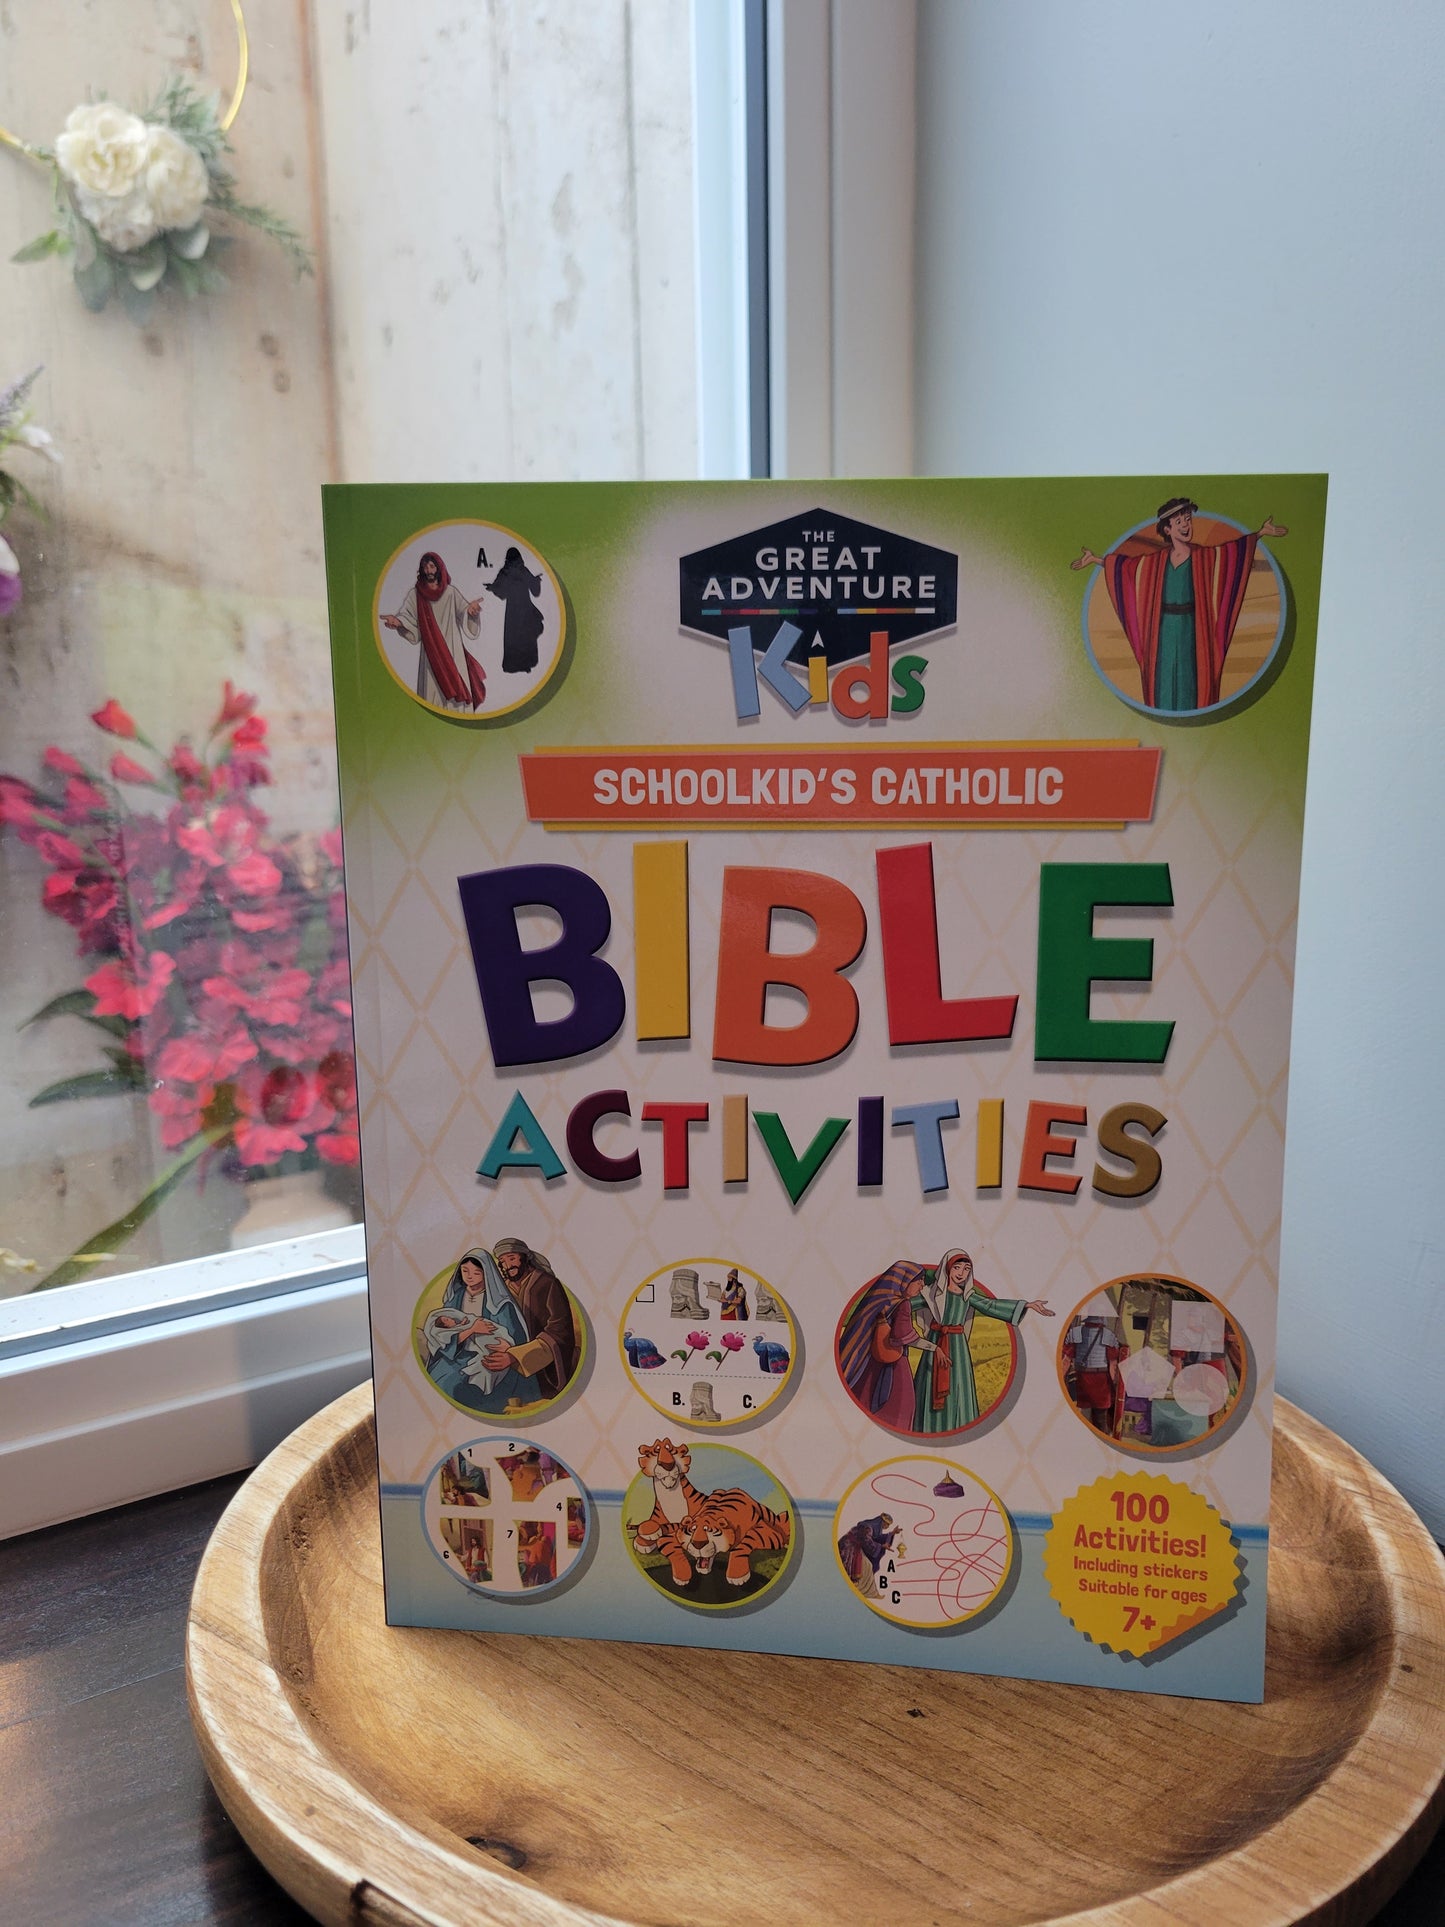 Schoolkid's Catholic Bible Activities, ages 7-11